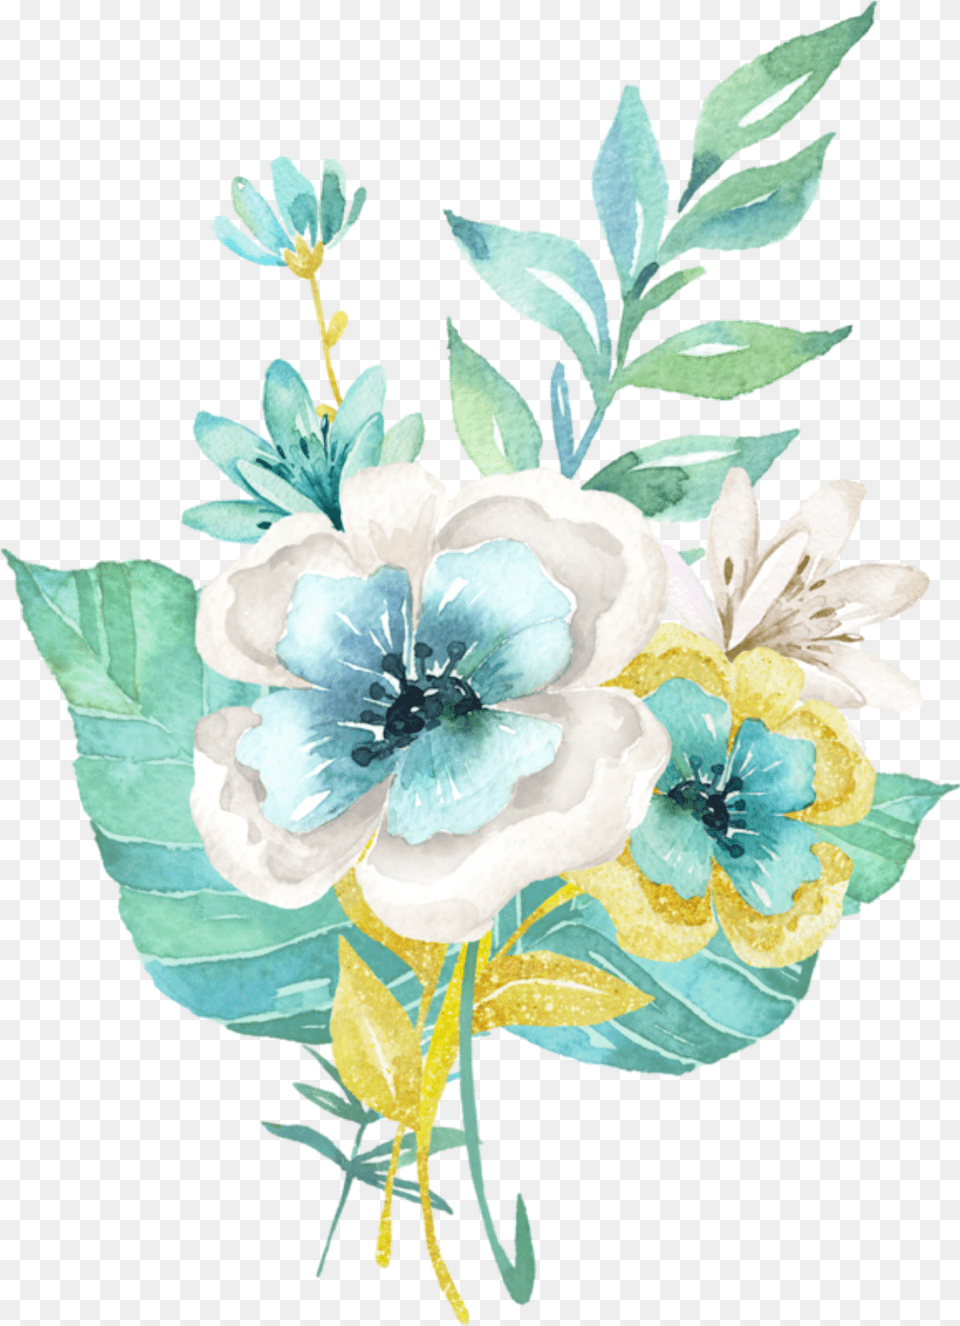 Ftestickers Watercolor Flowers Teal Blue Green Watercolor Flowers, Art, Floral Design, Graphics, Pattern Free Transparent Png